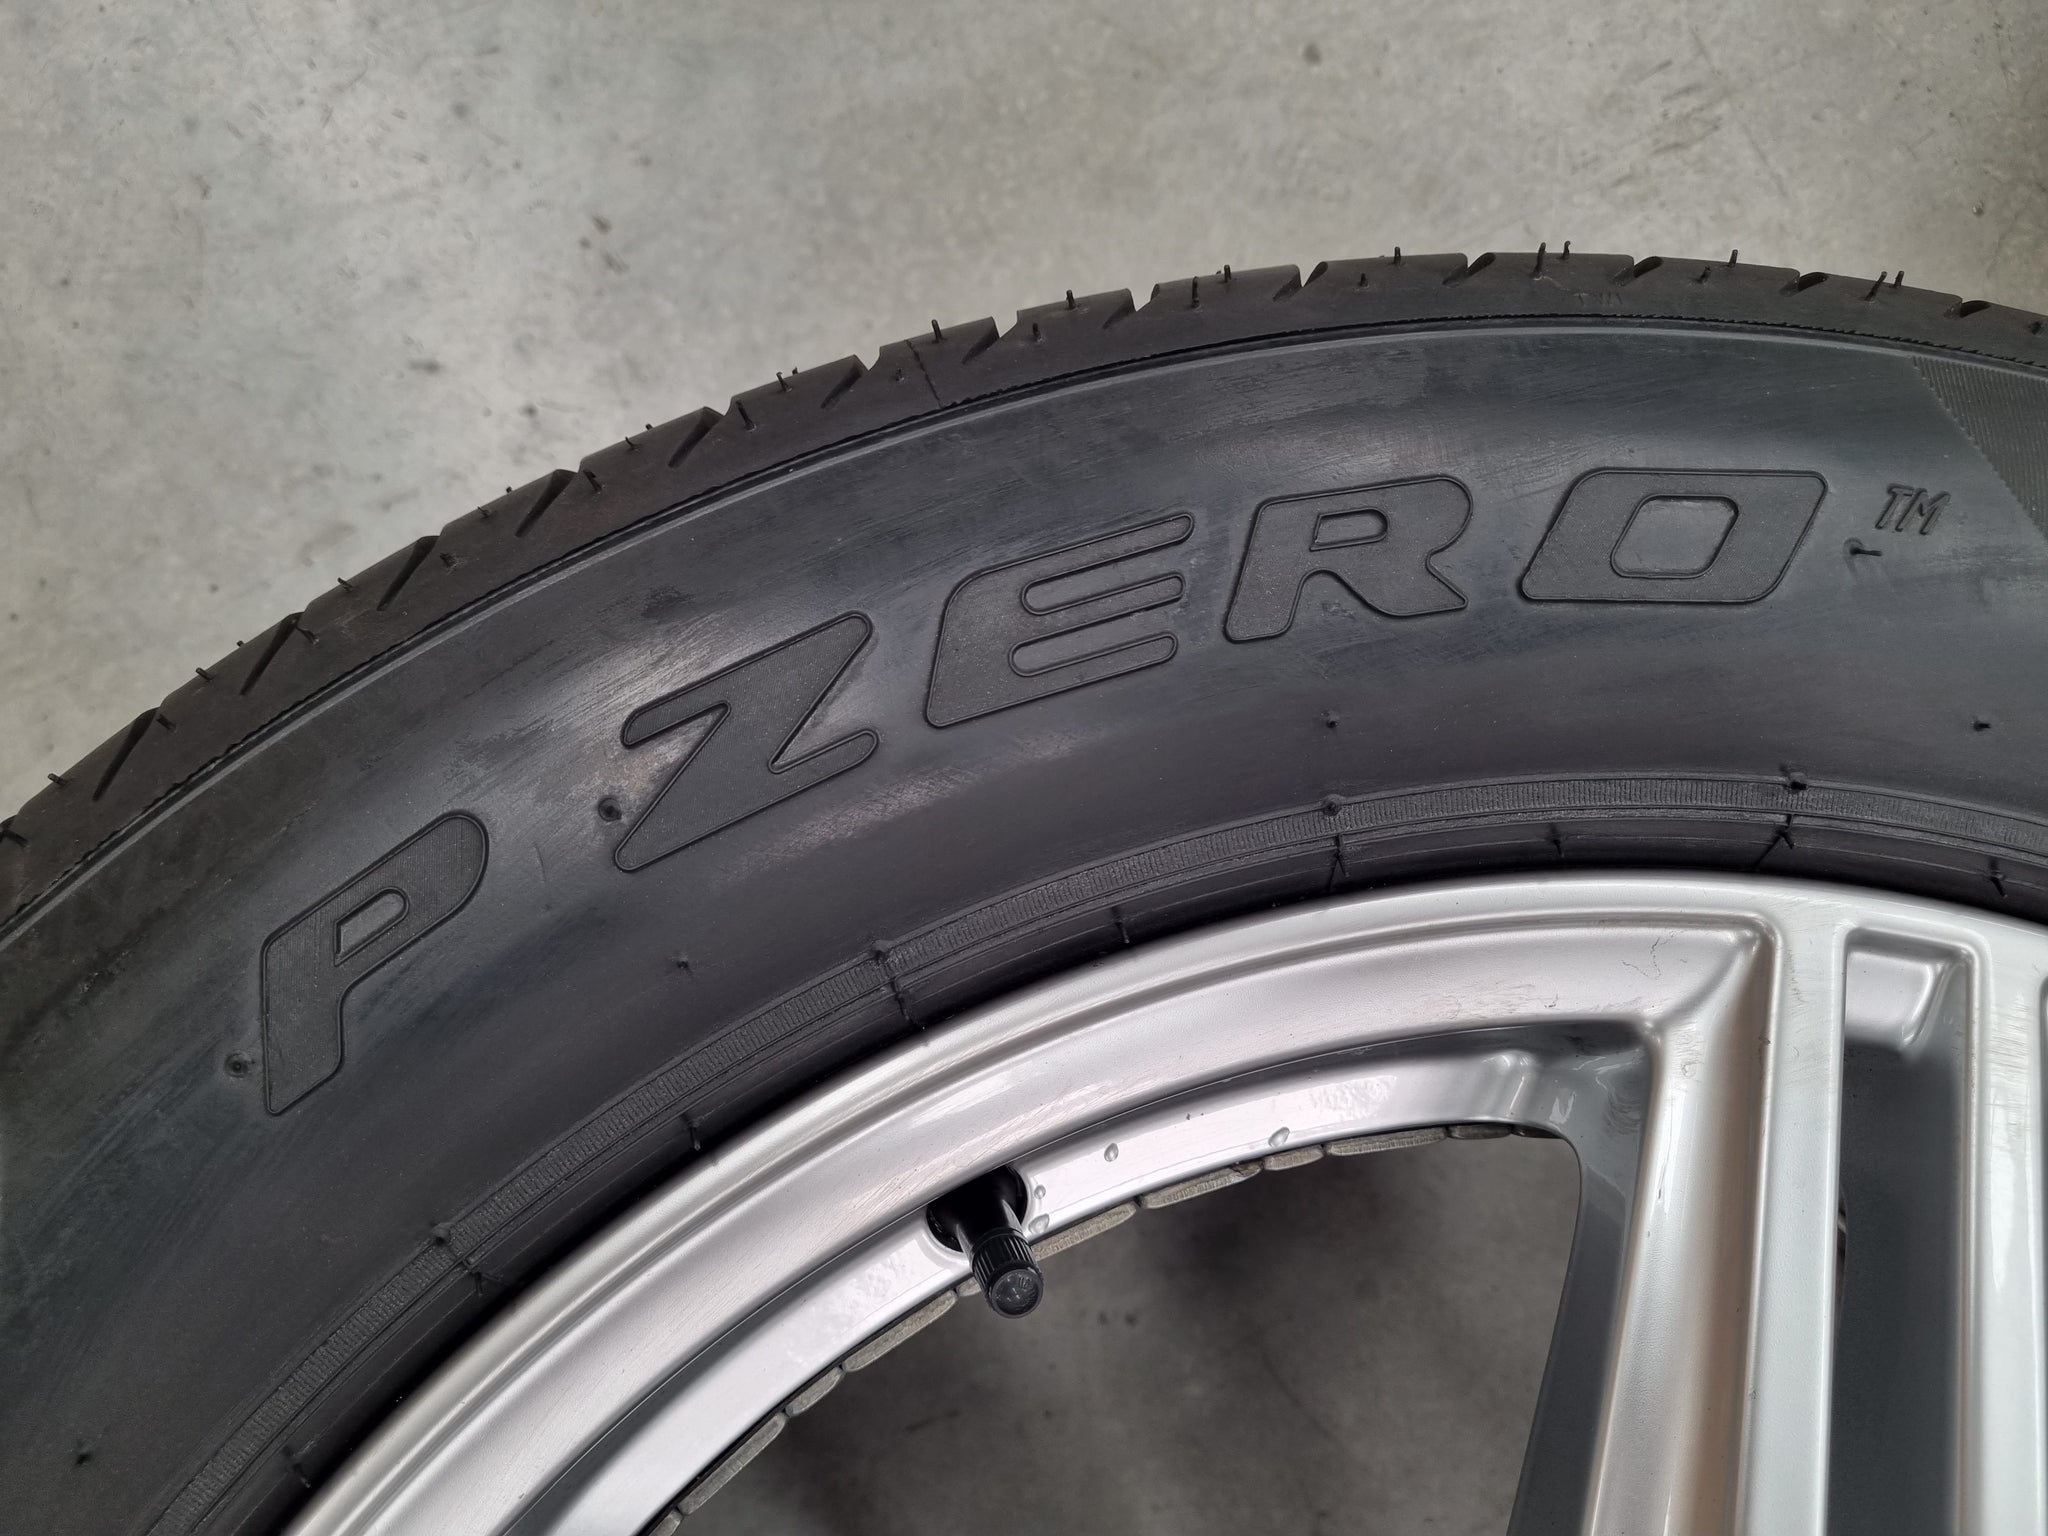 Load image into Gallery viewer, Genuine Porsche Cayenne 19 Inch Wheels and Pirelli Tyres Set of 4
